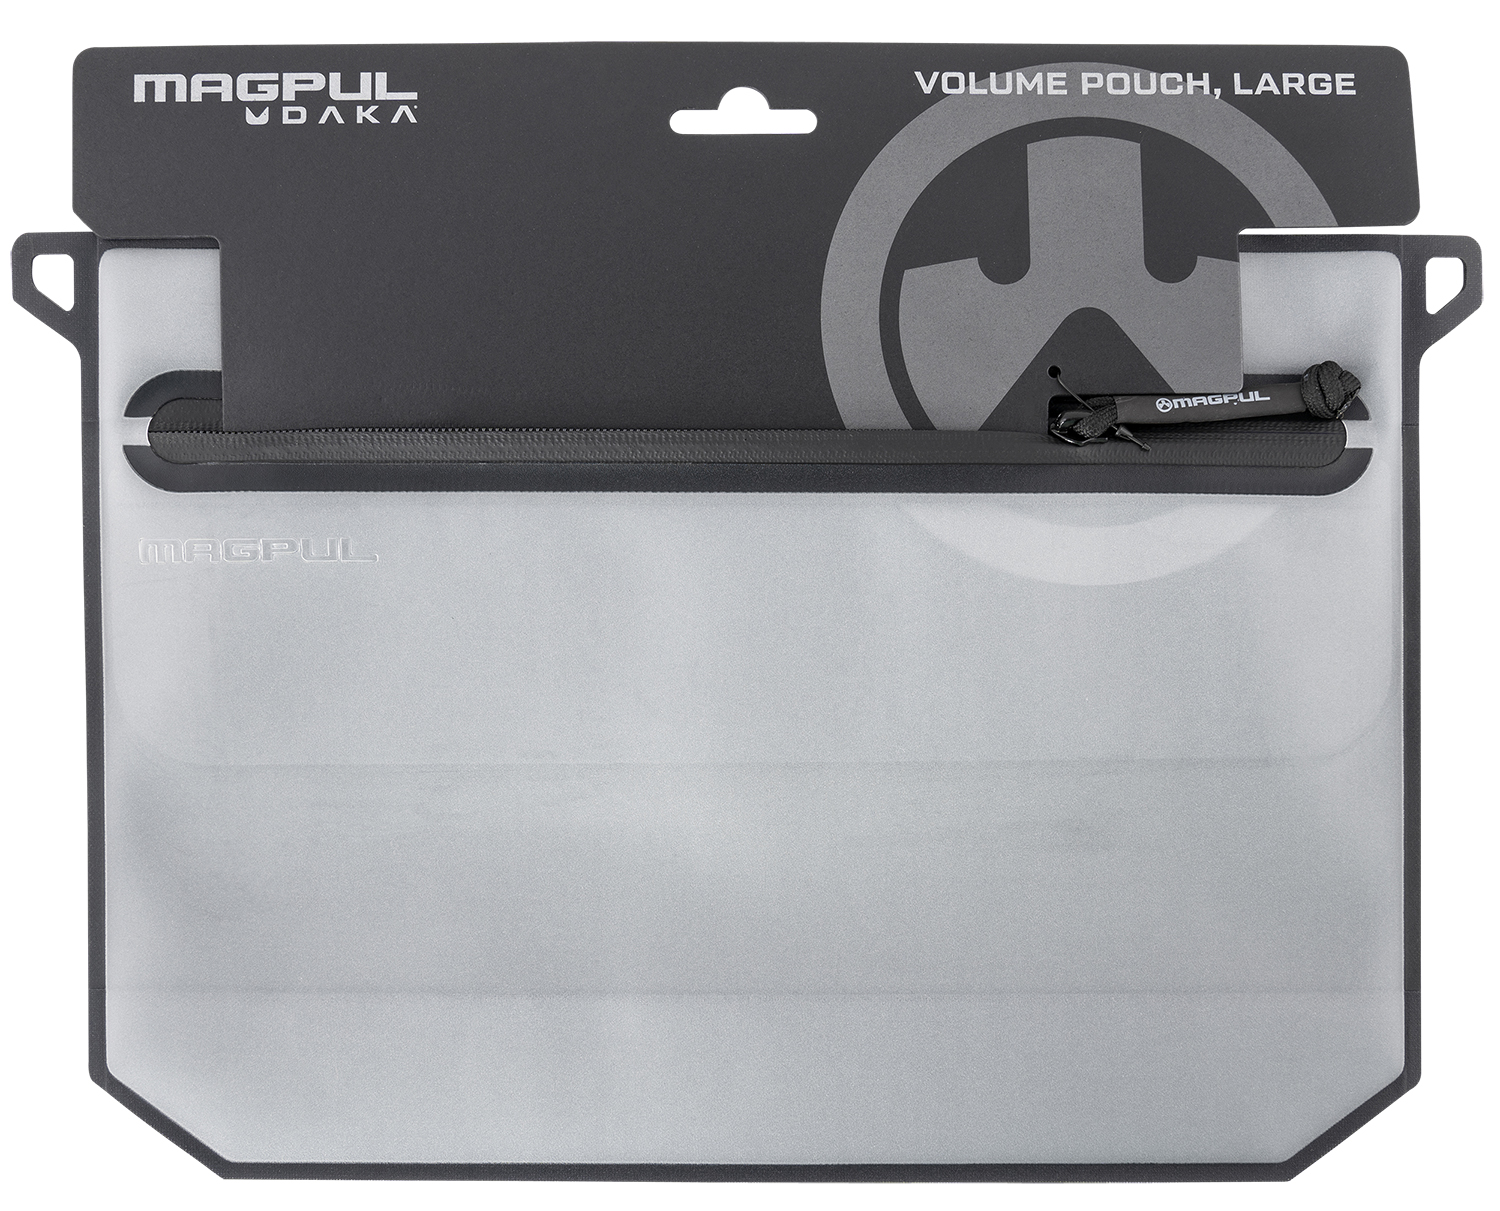 Magpul MAG1144001 DAKA Volume Pouch made of Polymer with Black Finish, 6...-img-0